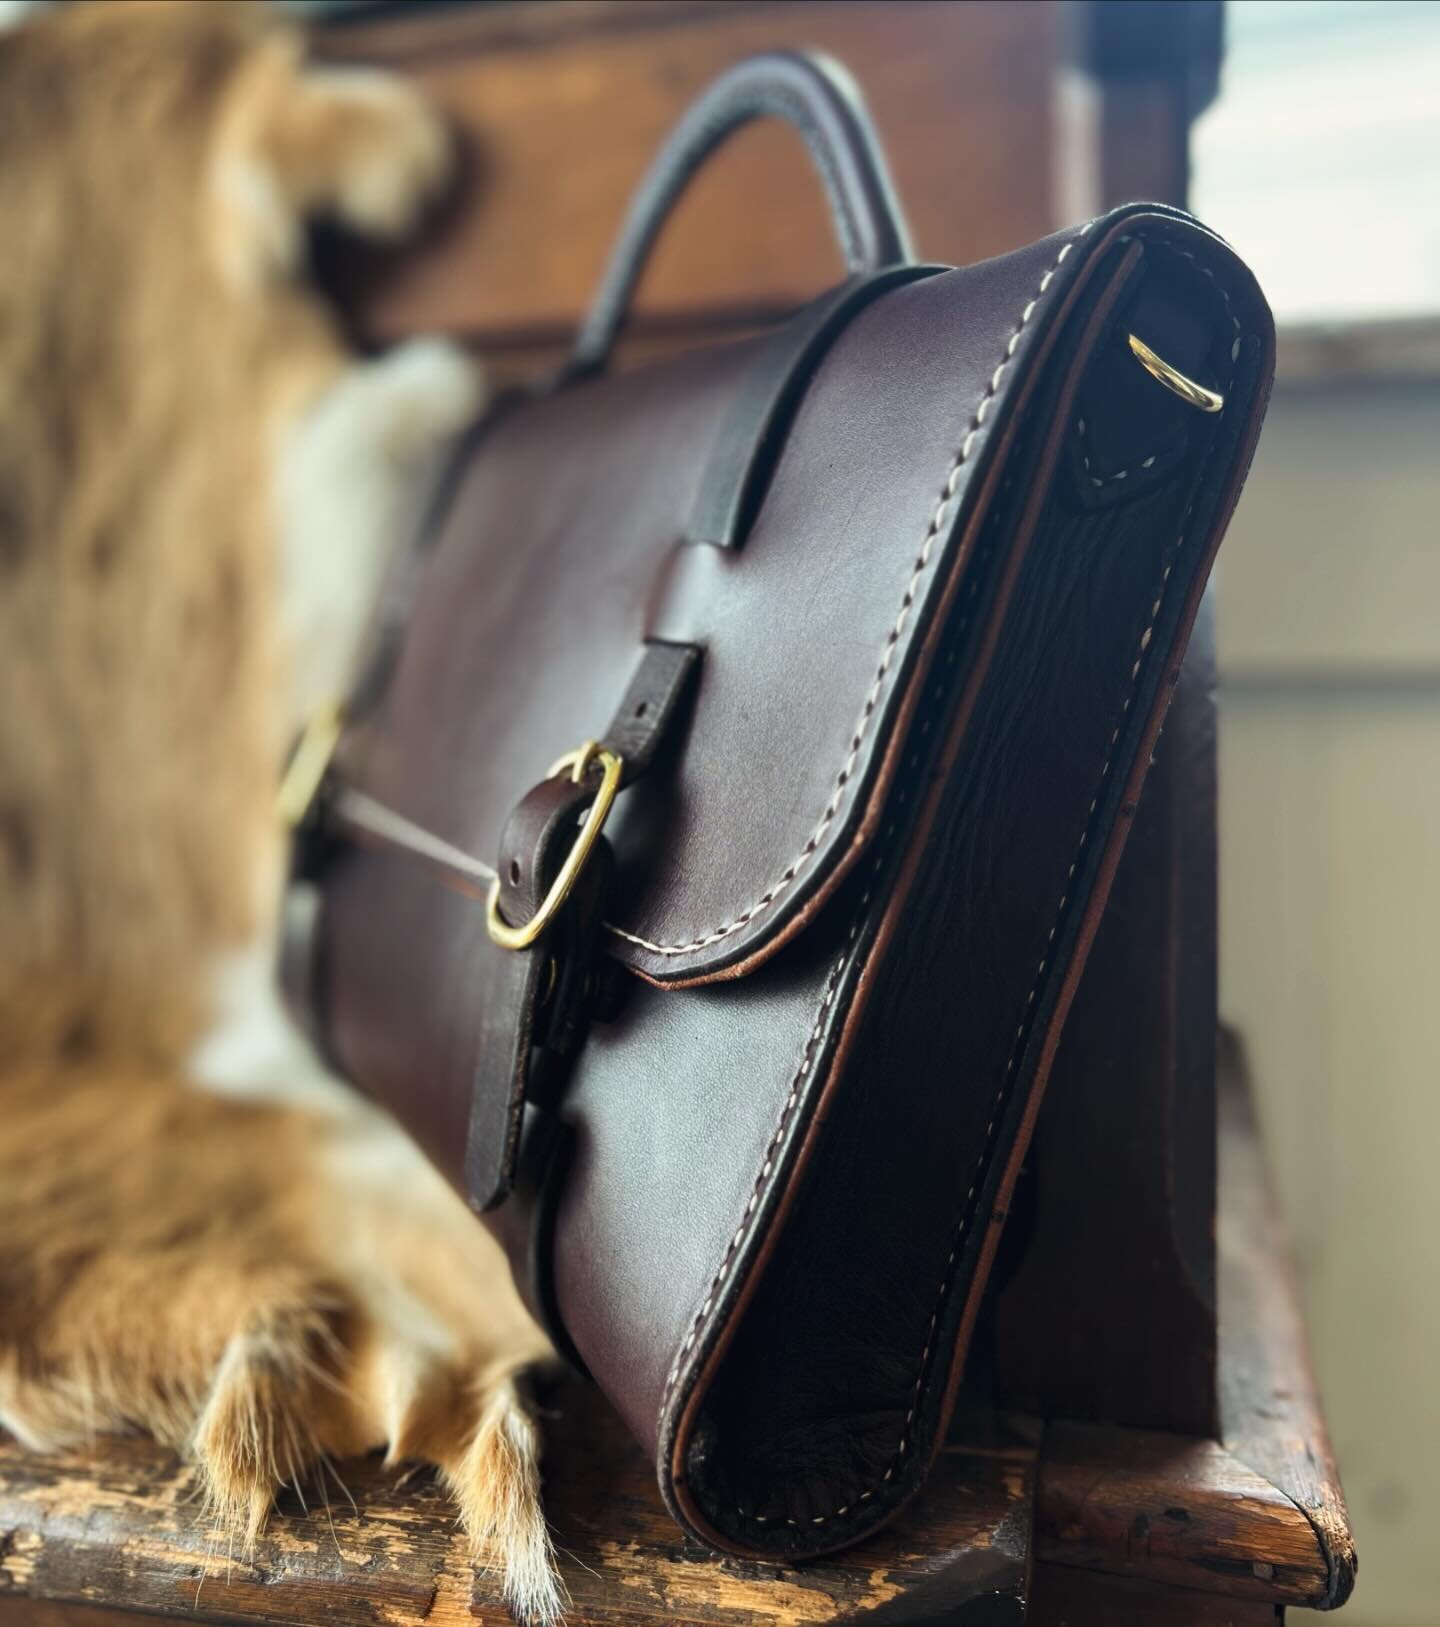 The perfect work bag. Elegant, simple and built to last for generations. Hand-stitched dark brown English bridle leather with an exquisite embossed ostrich lining. This is one of Victor Powells original designs that I made come to life from an old ph